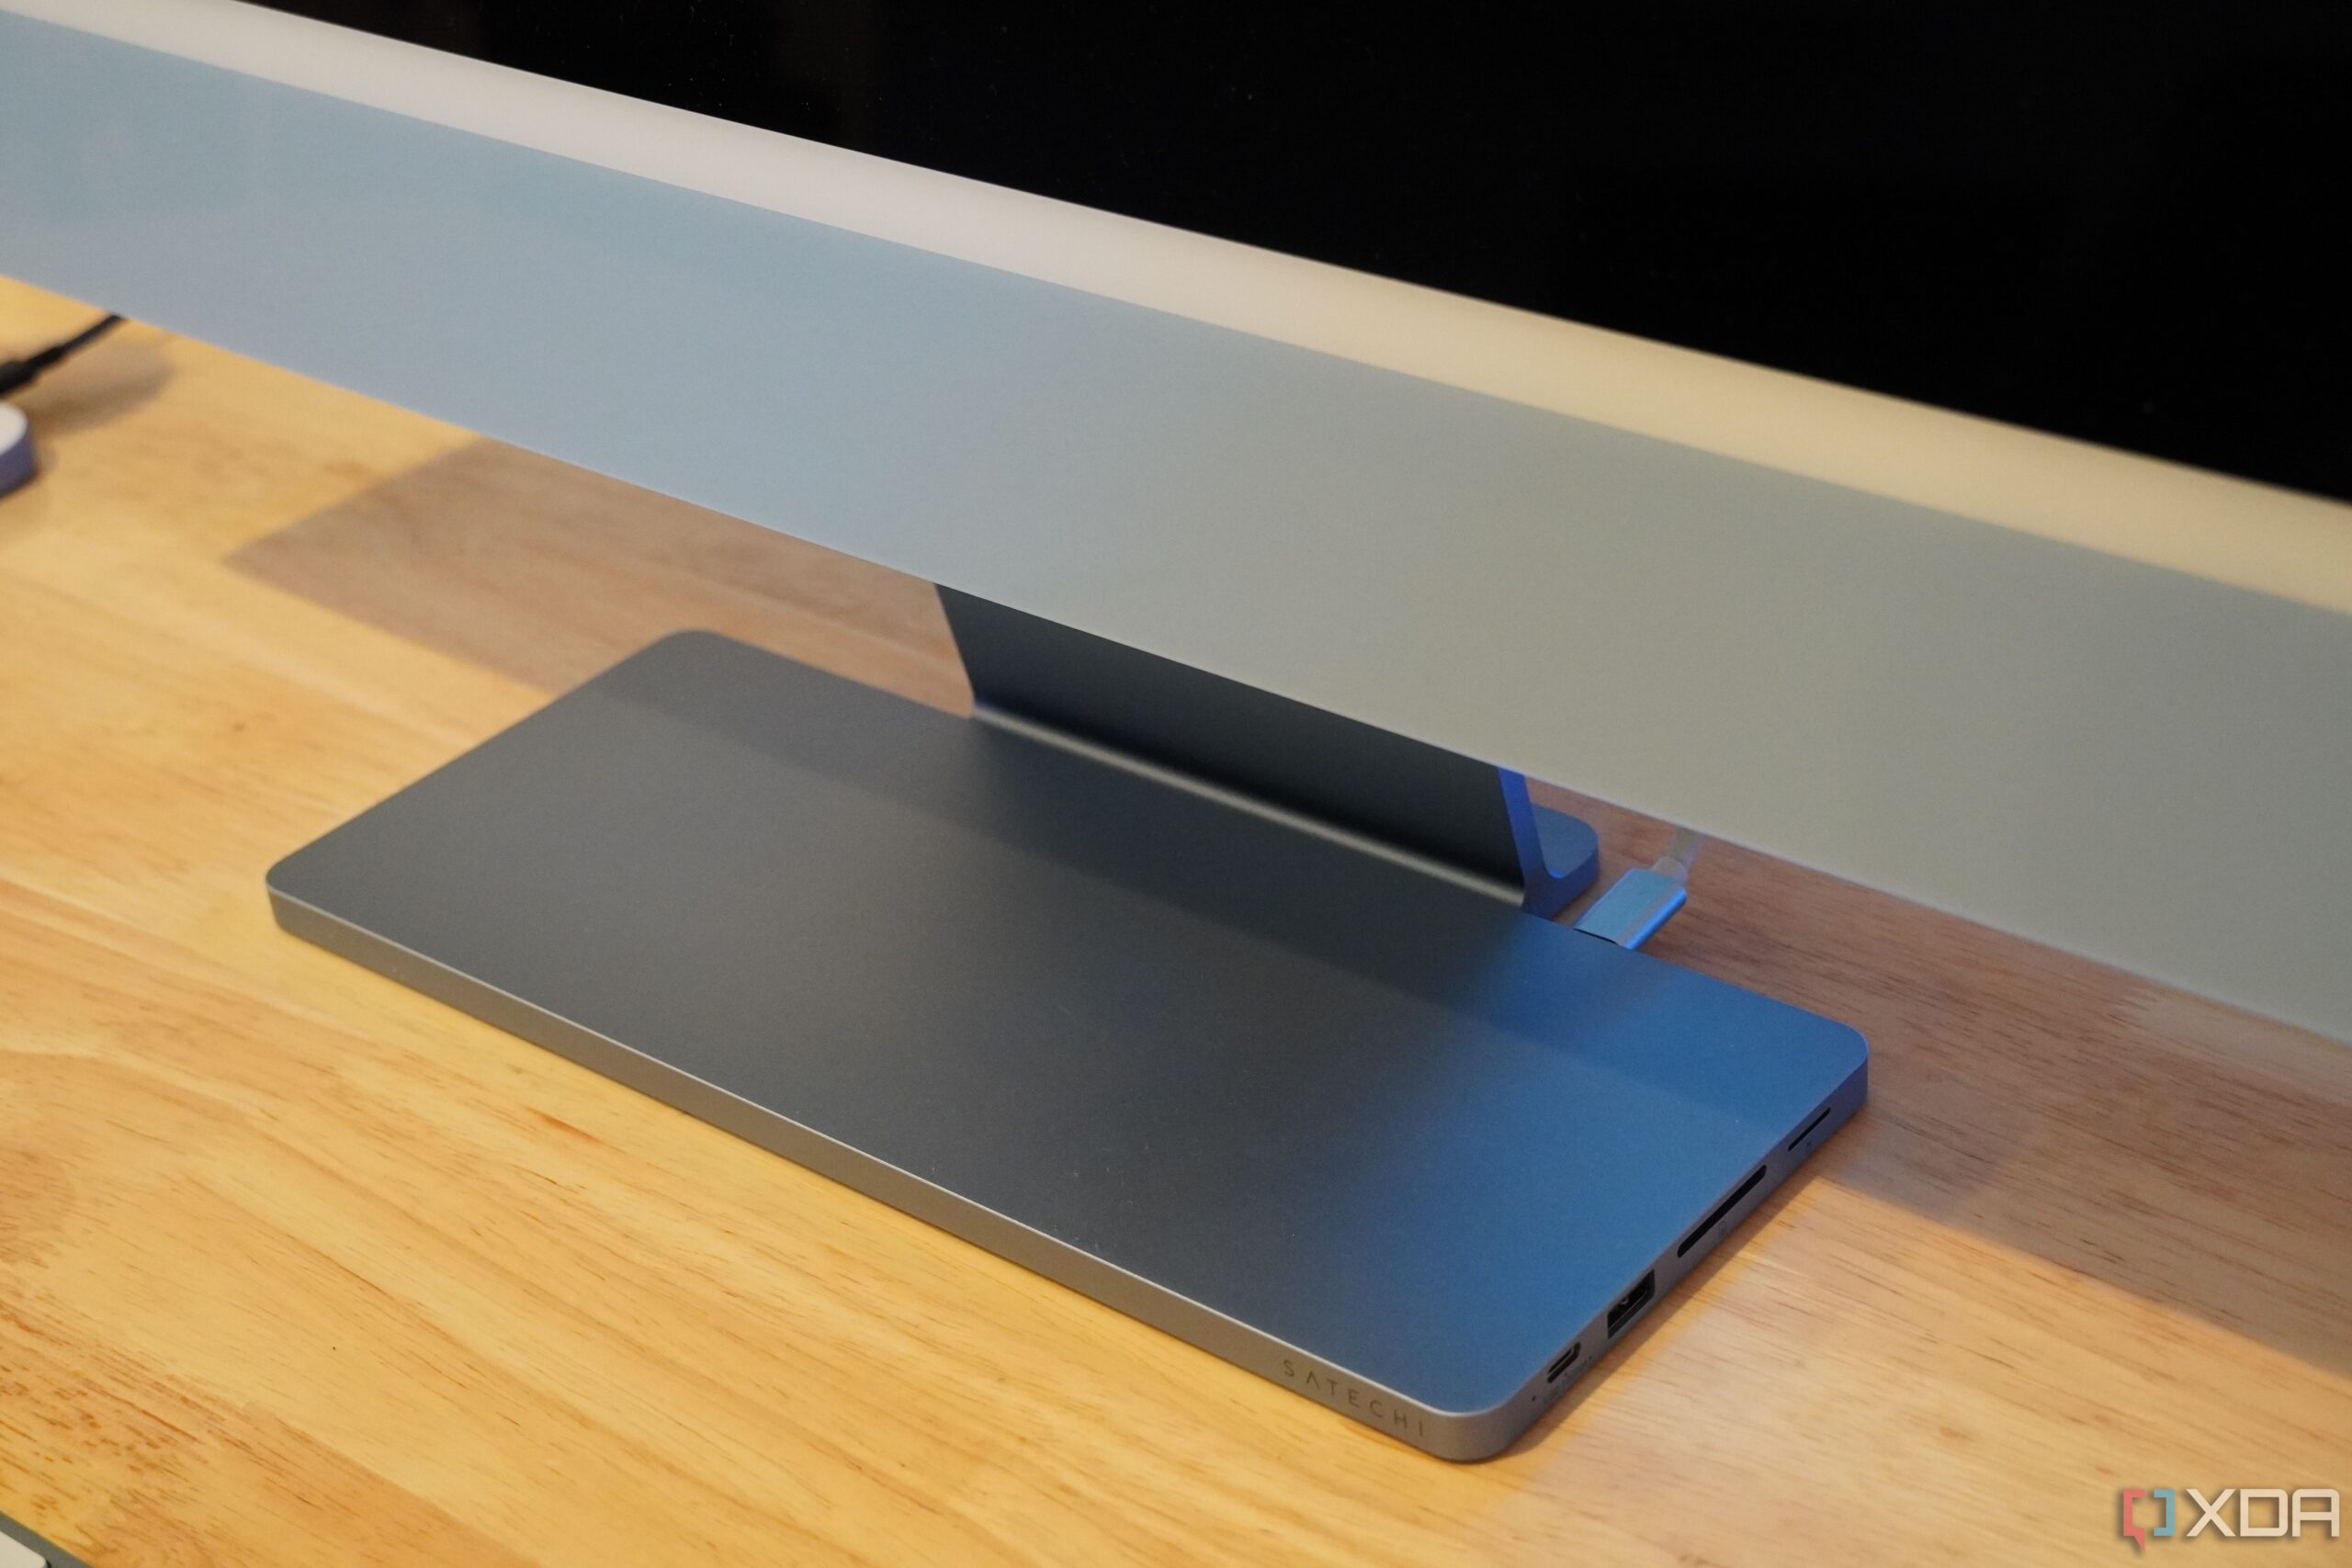 satechi-usb-c-slim-dock-for-imac-review:-a-must-have-apple-accessory